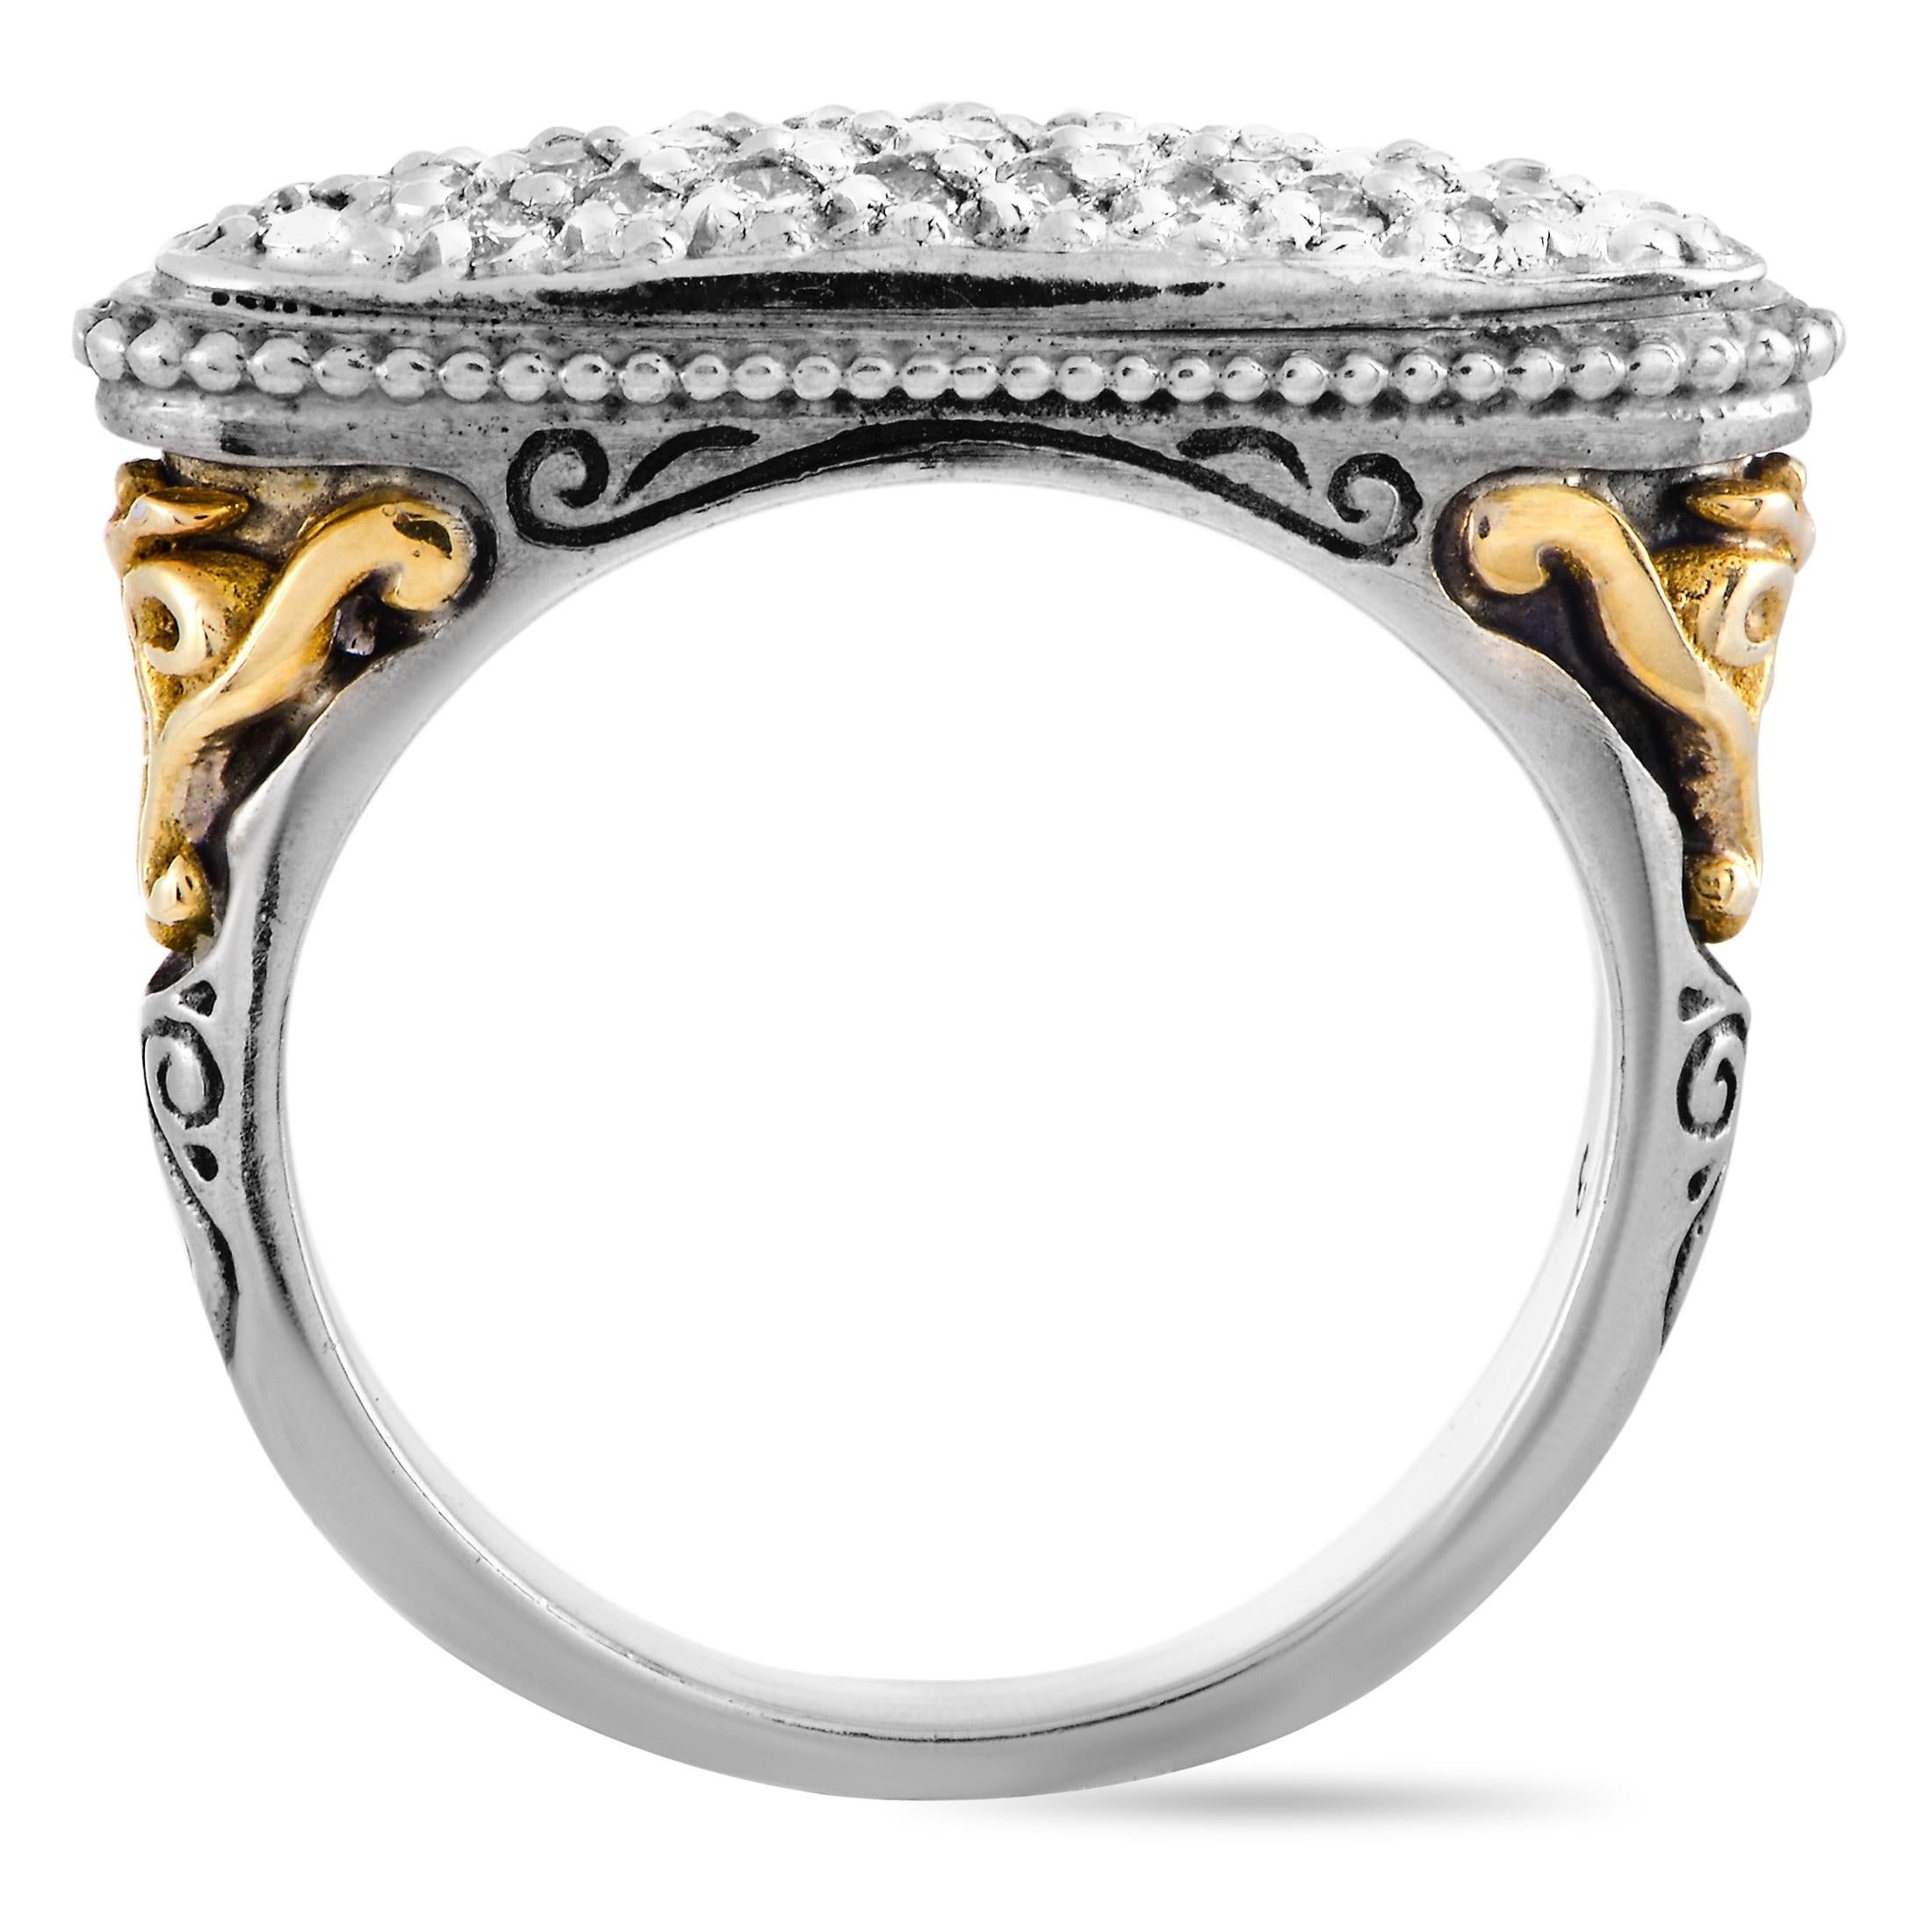 This Konstantino ring is made out of 18K yellow gold and sterling silver and weighs 8.1 grams. It is set with diamond stones that total 0.40 carats. The ring boasts a band thickness of 2 mm and a top height of 5 mm, while top dimensions measure 7 by